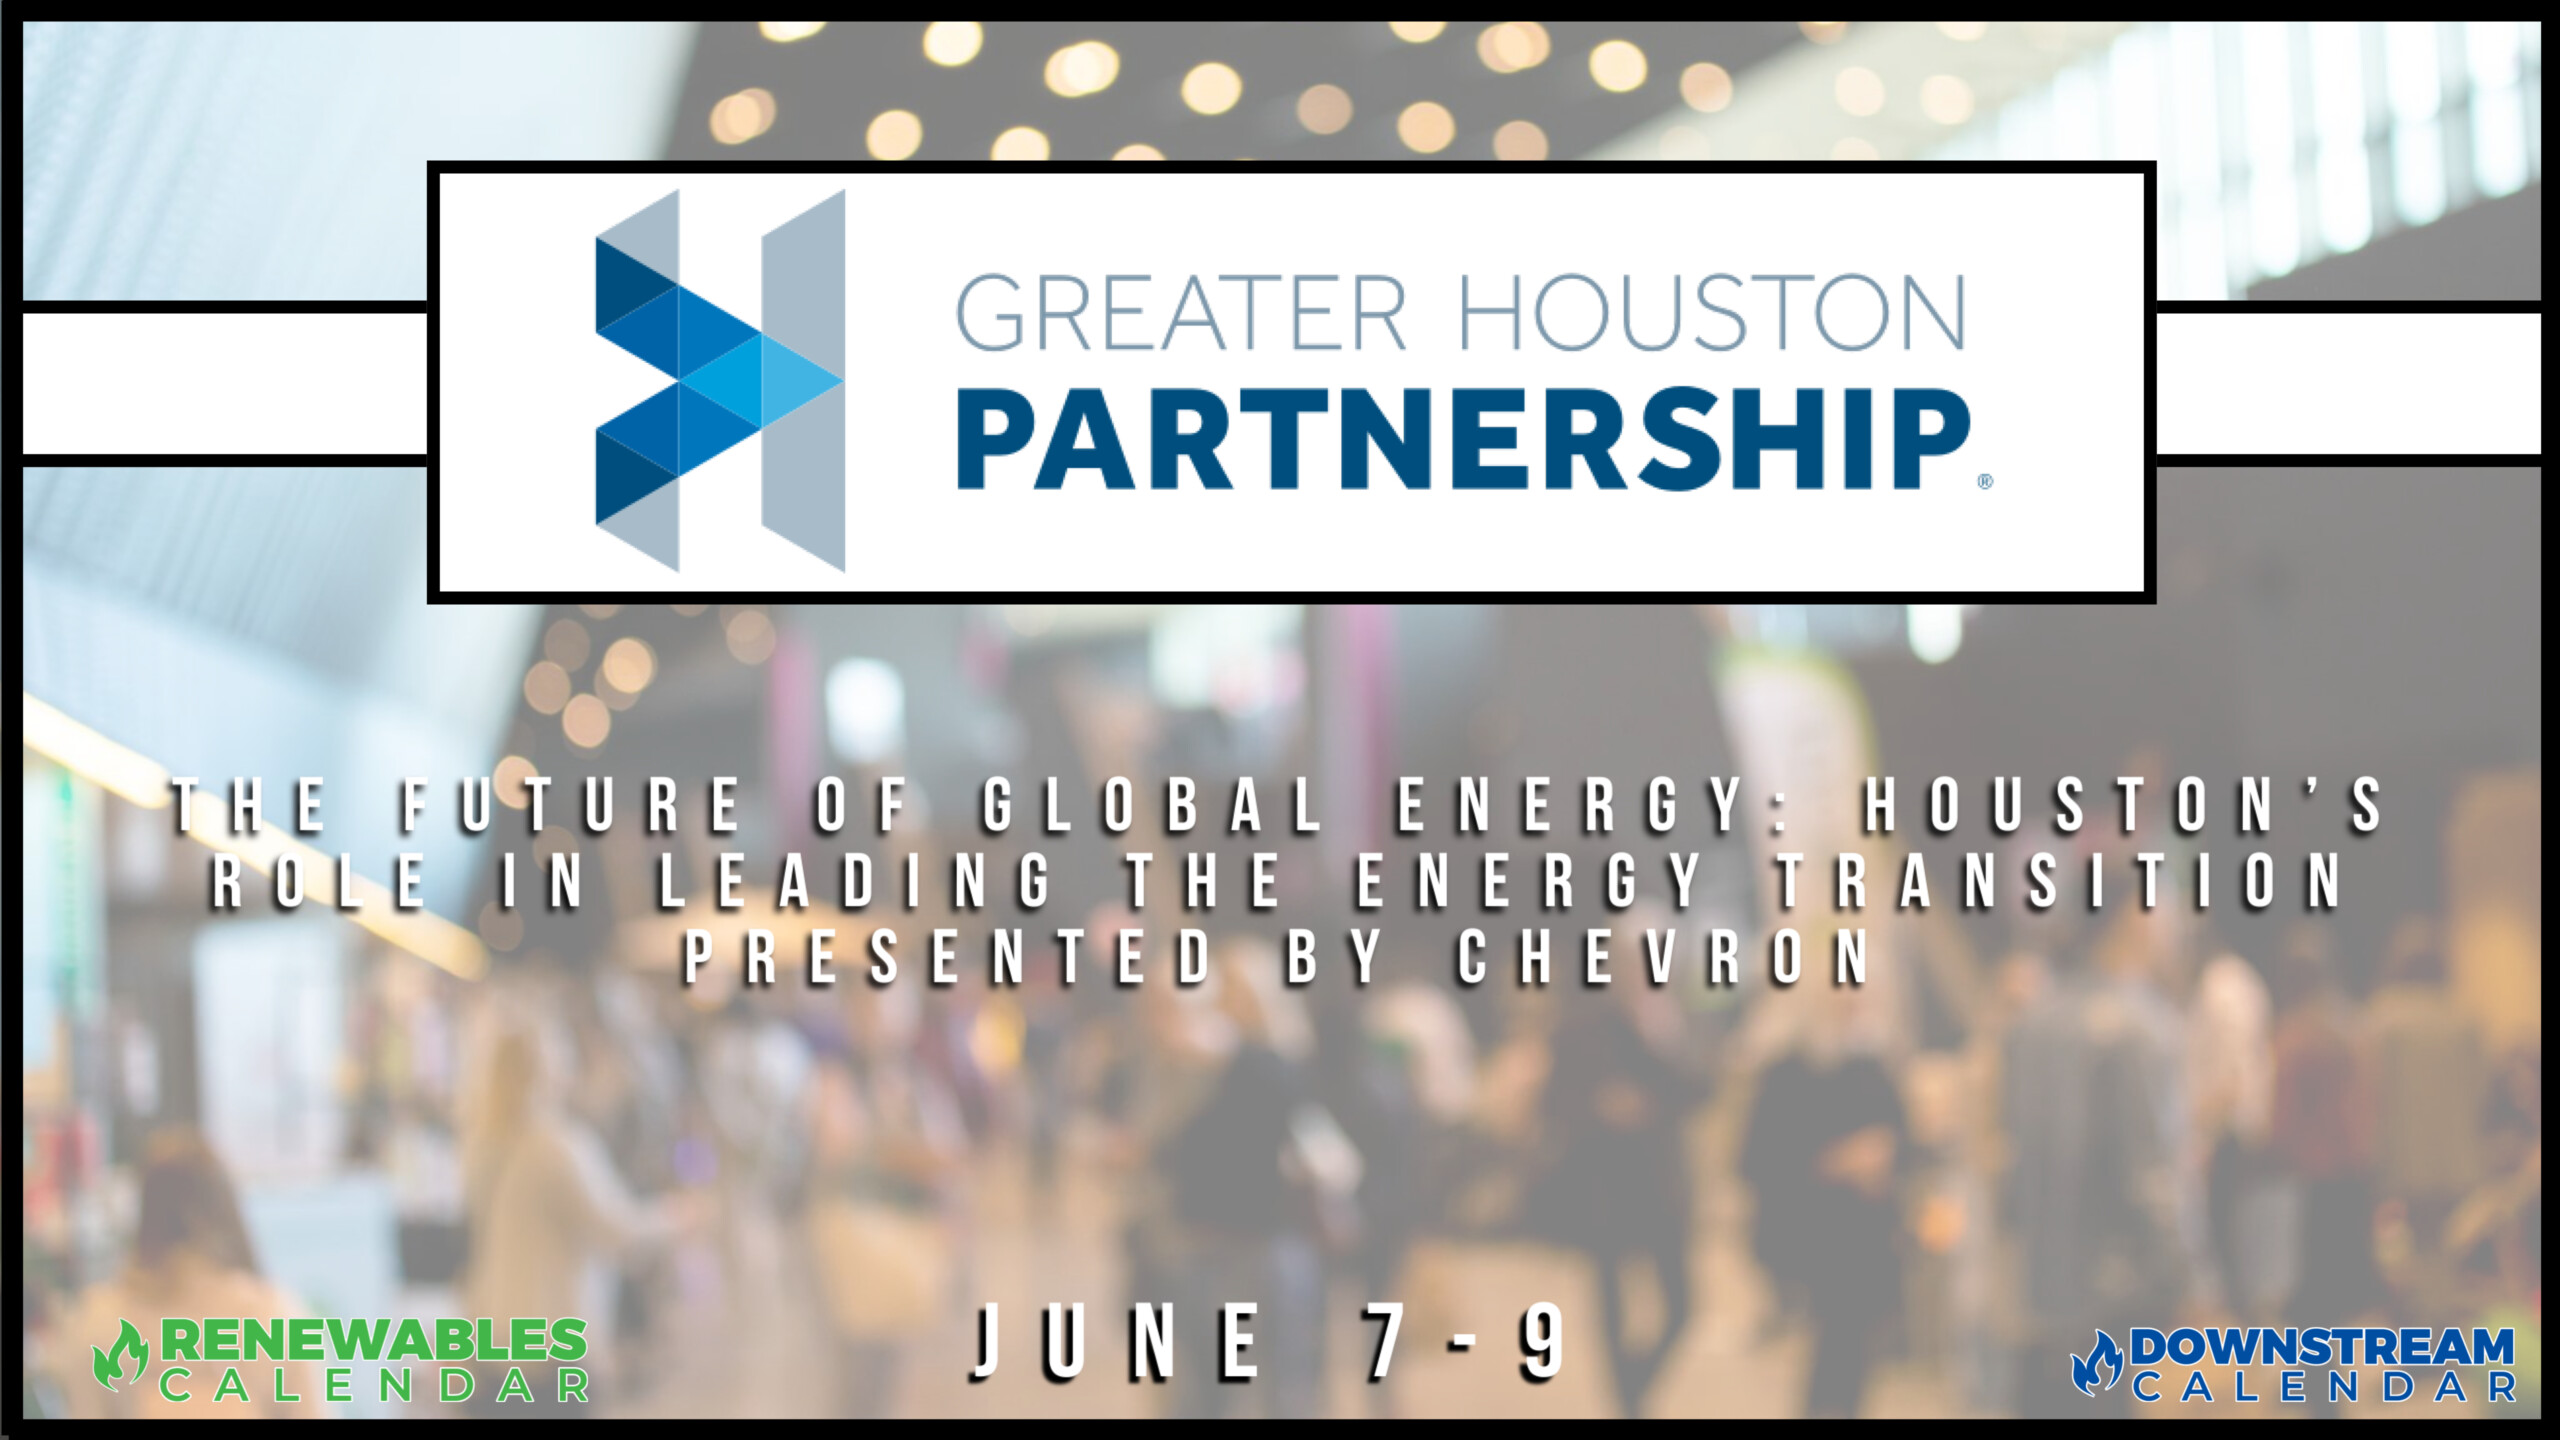 Greater Houston Partnership – The Future of Global Energy: Houston’s Role in Leading the Energy Transition Presented by Chevron – June 7-9